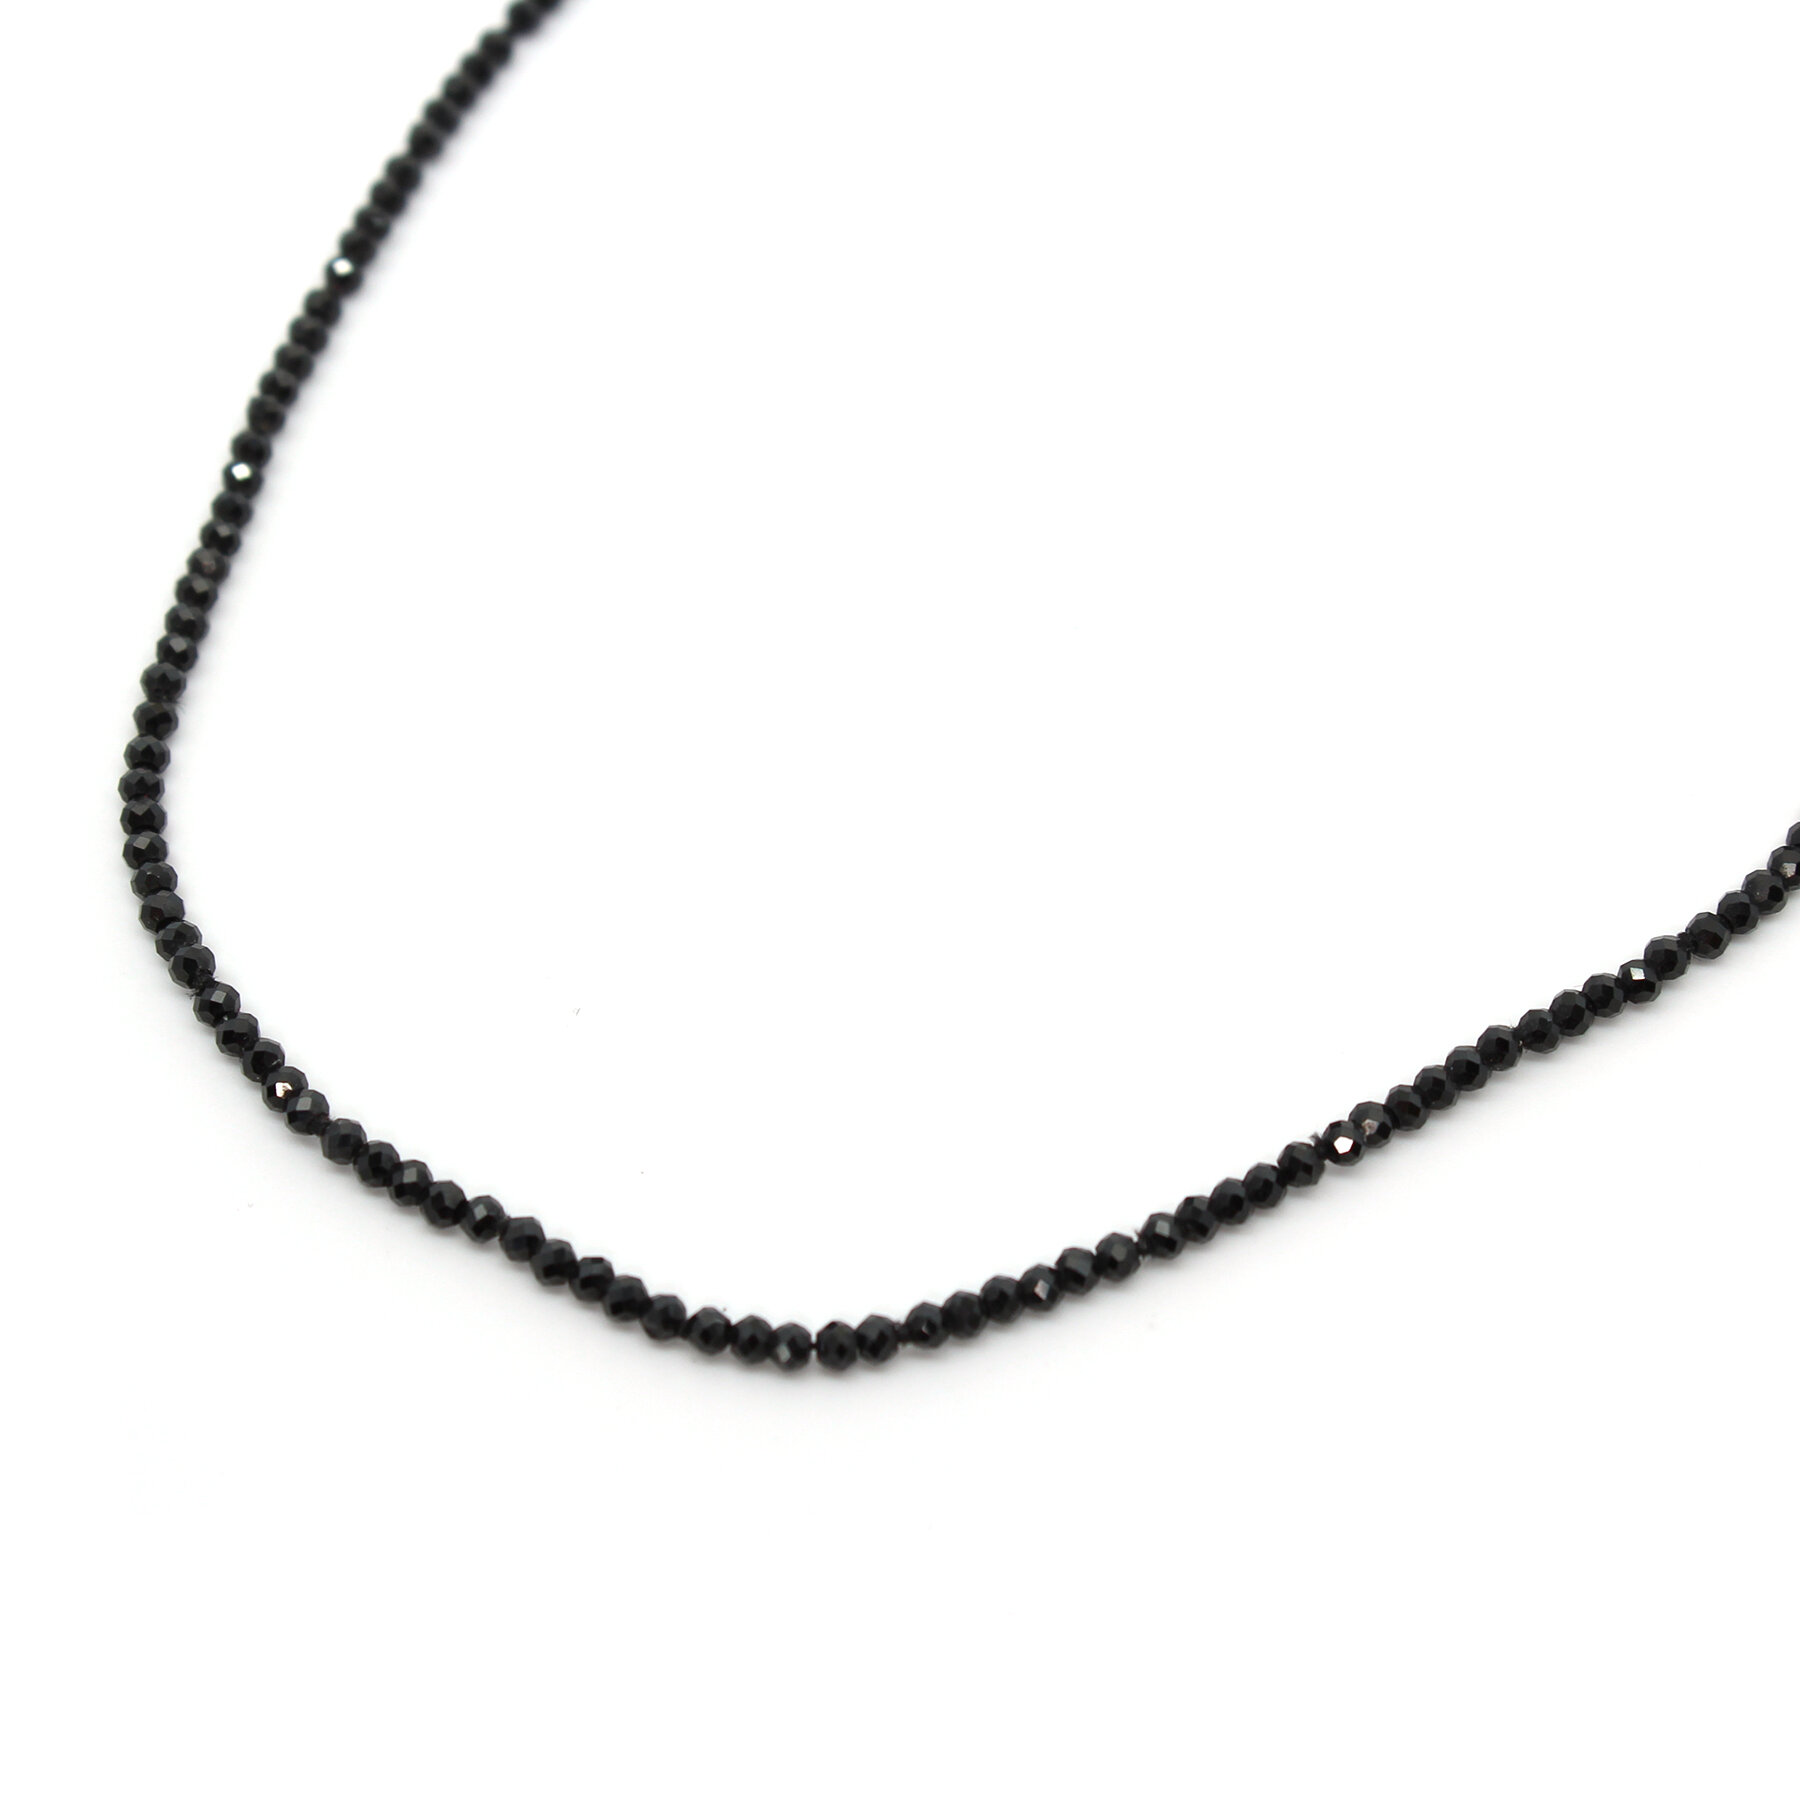 Shop LC Black Spinel Necklace for Women 925 Sterling Silver Cubic Zirconia  Jewelry Stainless Steel Size 20